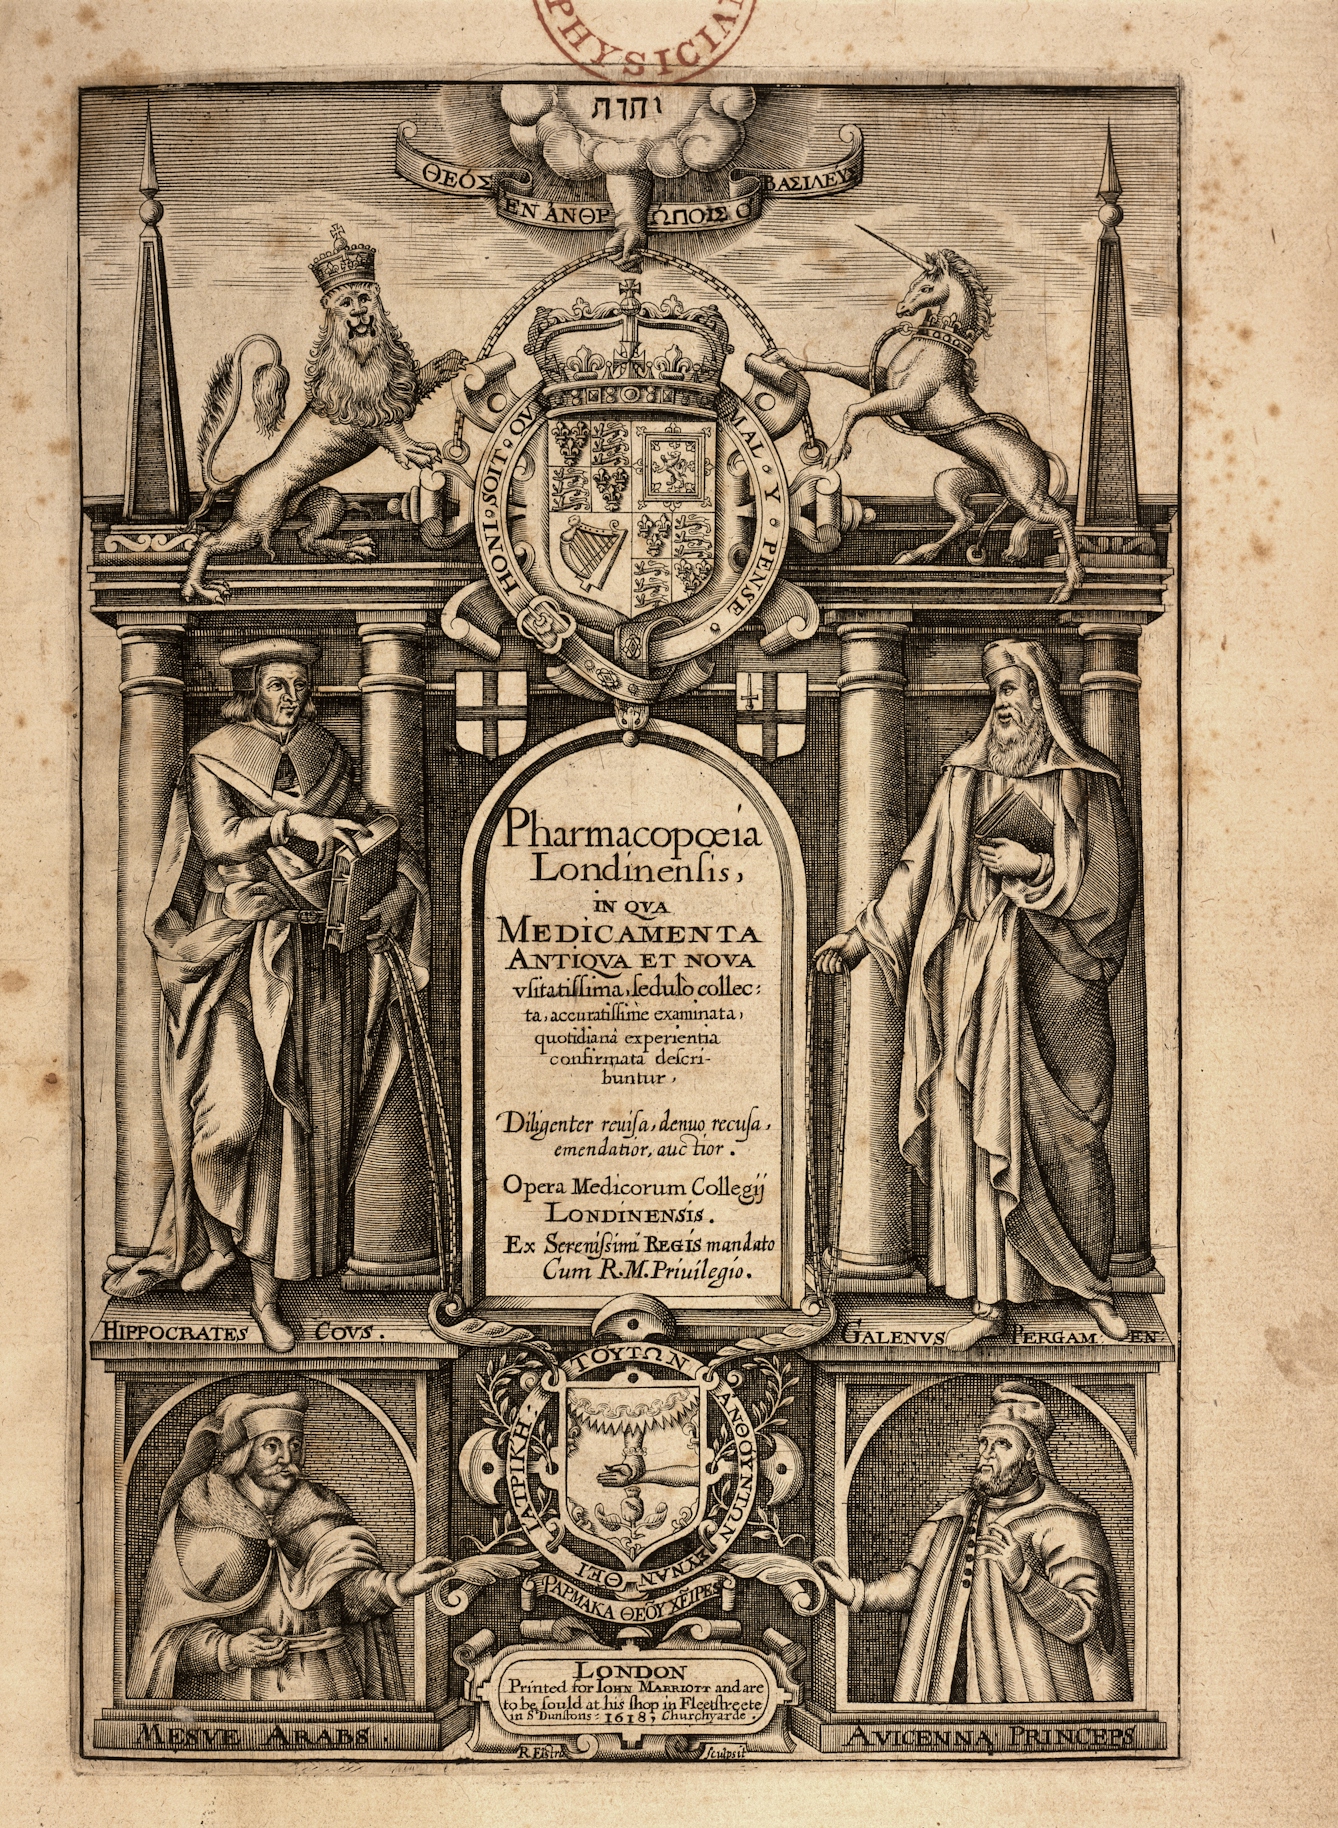 Title page from 1617 book Pharmacopoeia Londinensis showing engraved images of figures of Hippocrates, Galen, Avicenna and Masawaiyh below the crest of the Royal College of Physicians